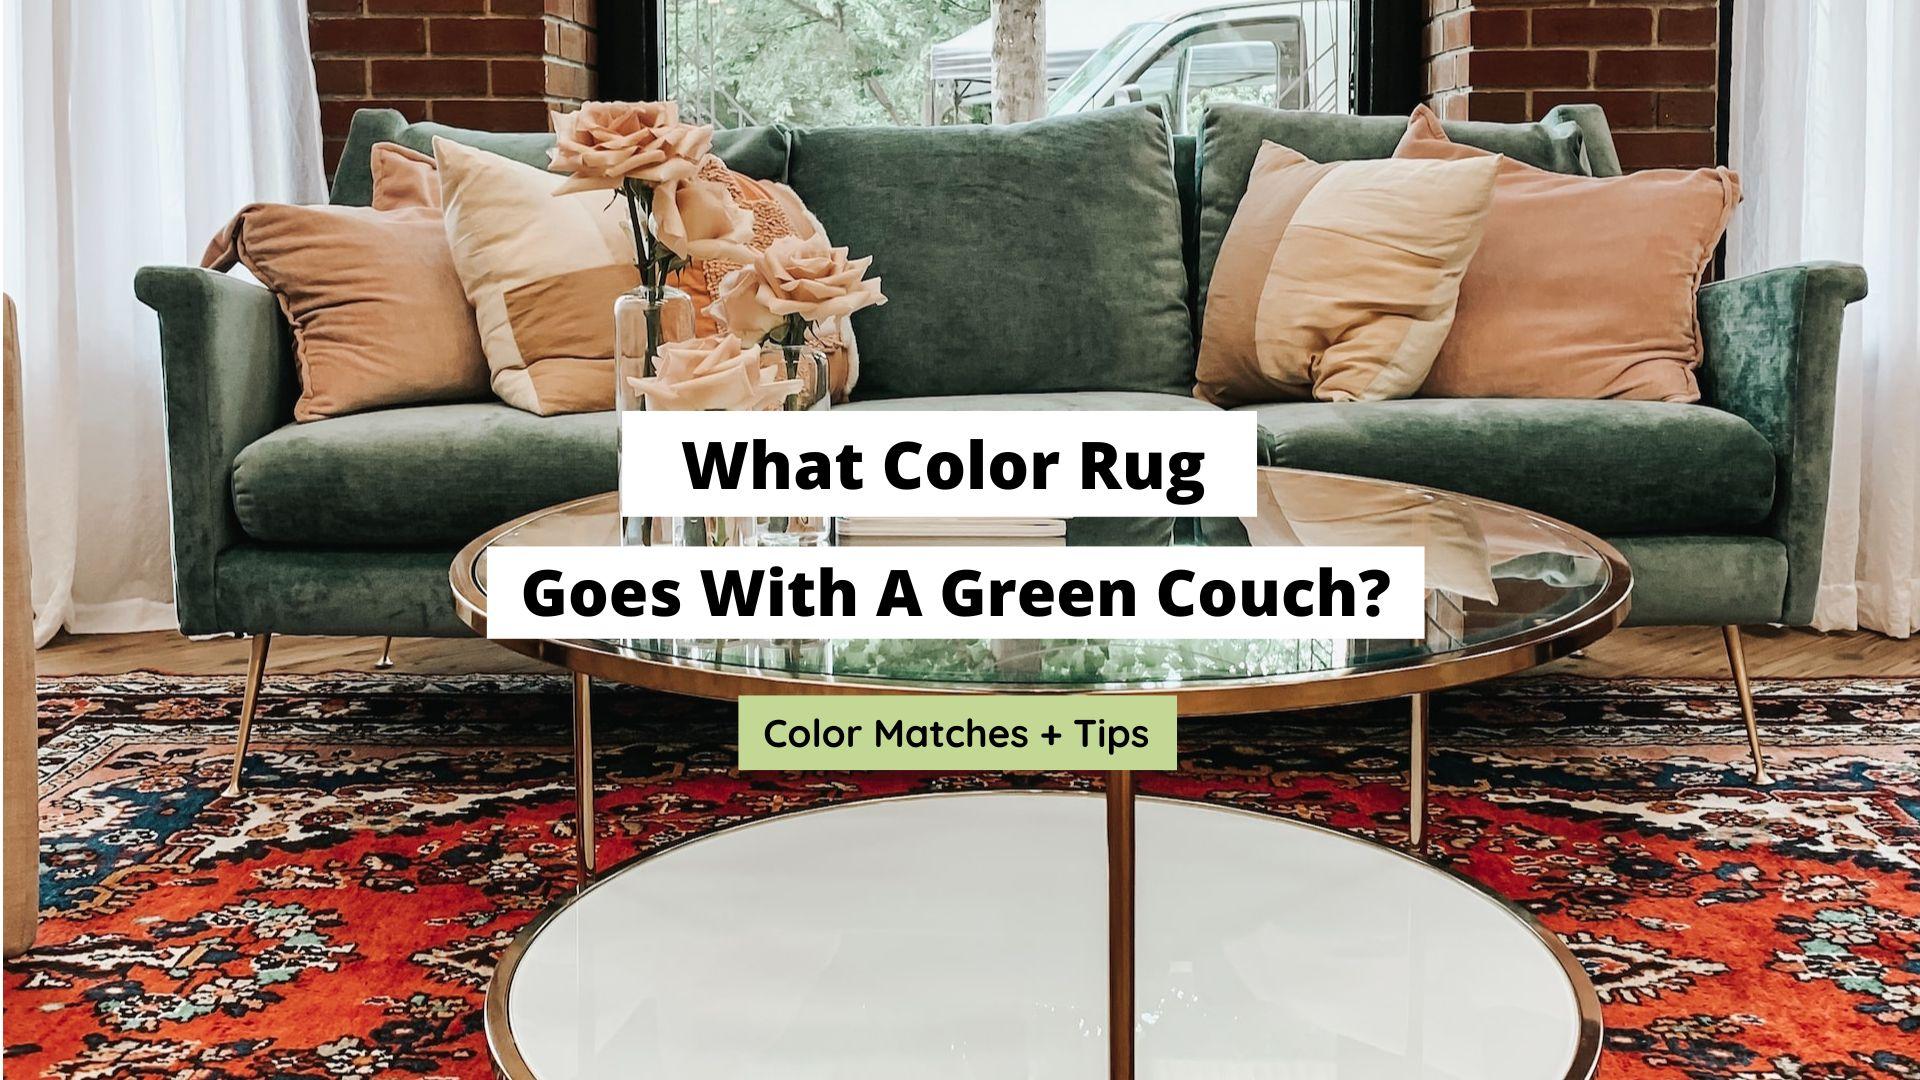 What Color Rug Goes With a Green Couch? (Best Colors) - Craftsonfire